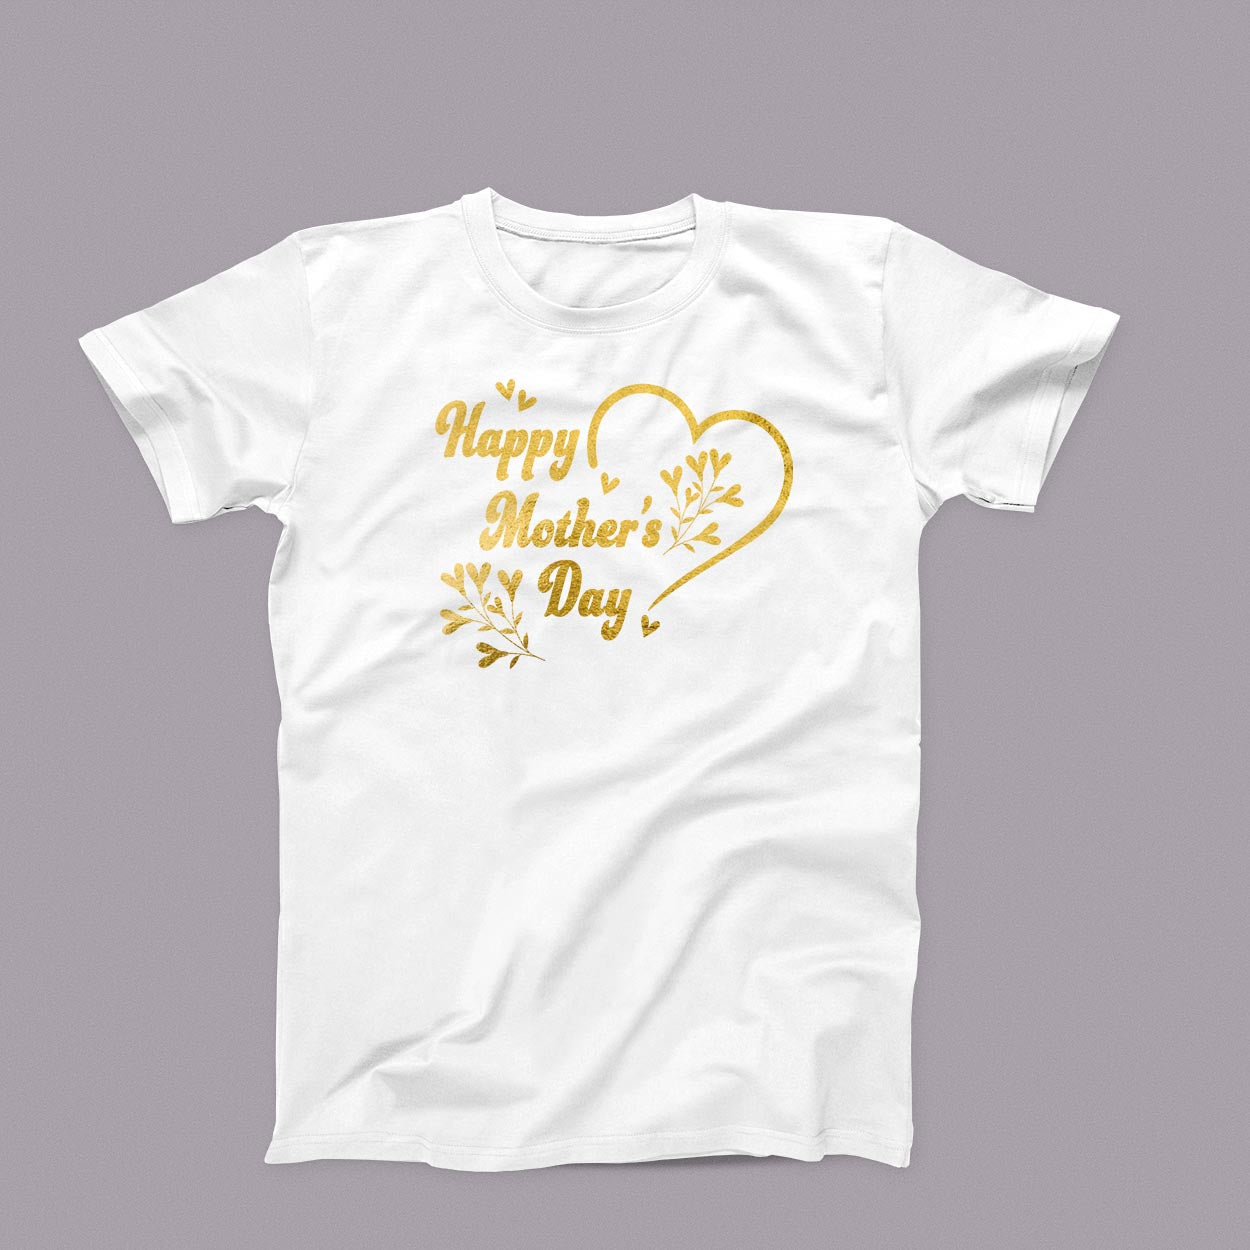 T-shirt:  Happy Mother's Day (Gold Foil)